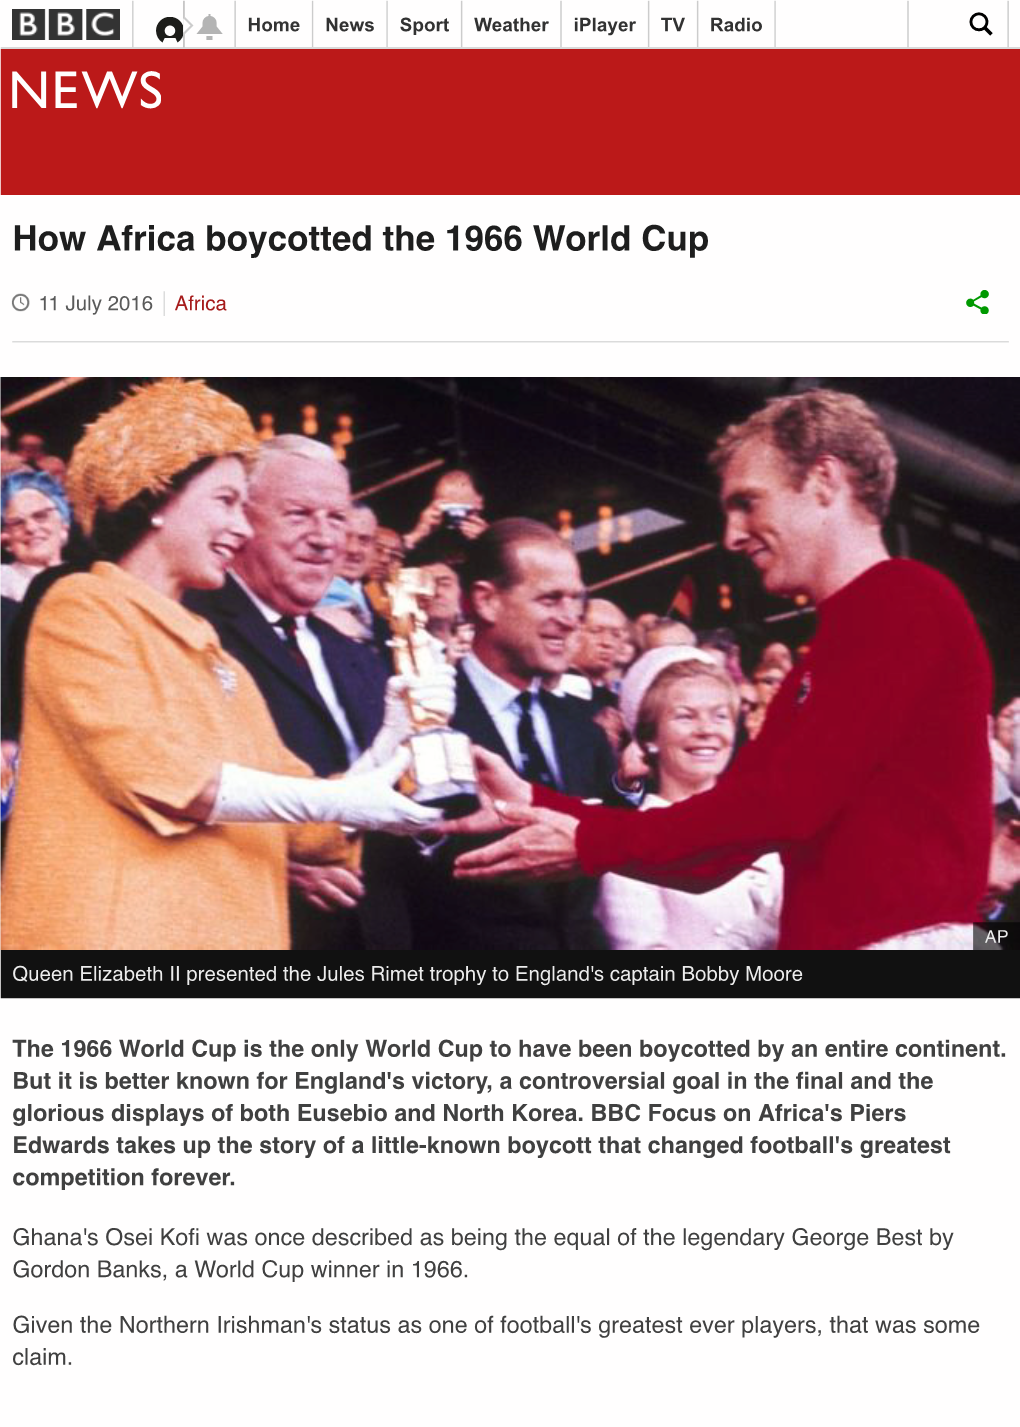 How Africa Boycotted the 1966 World Cup